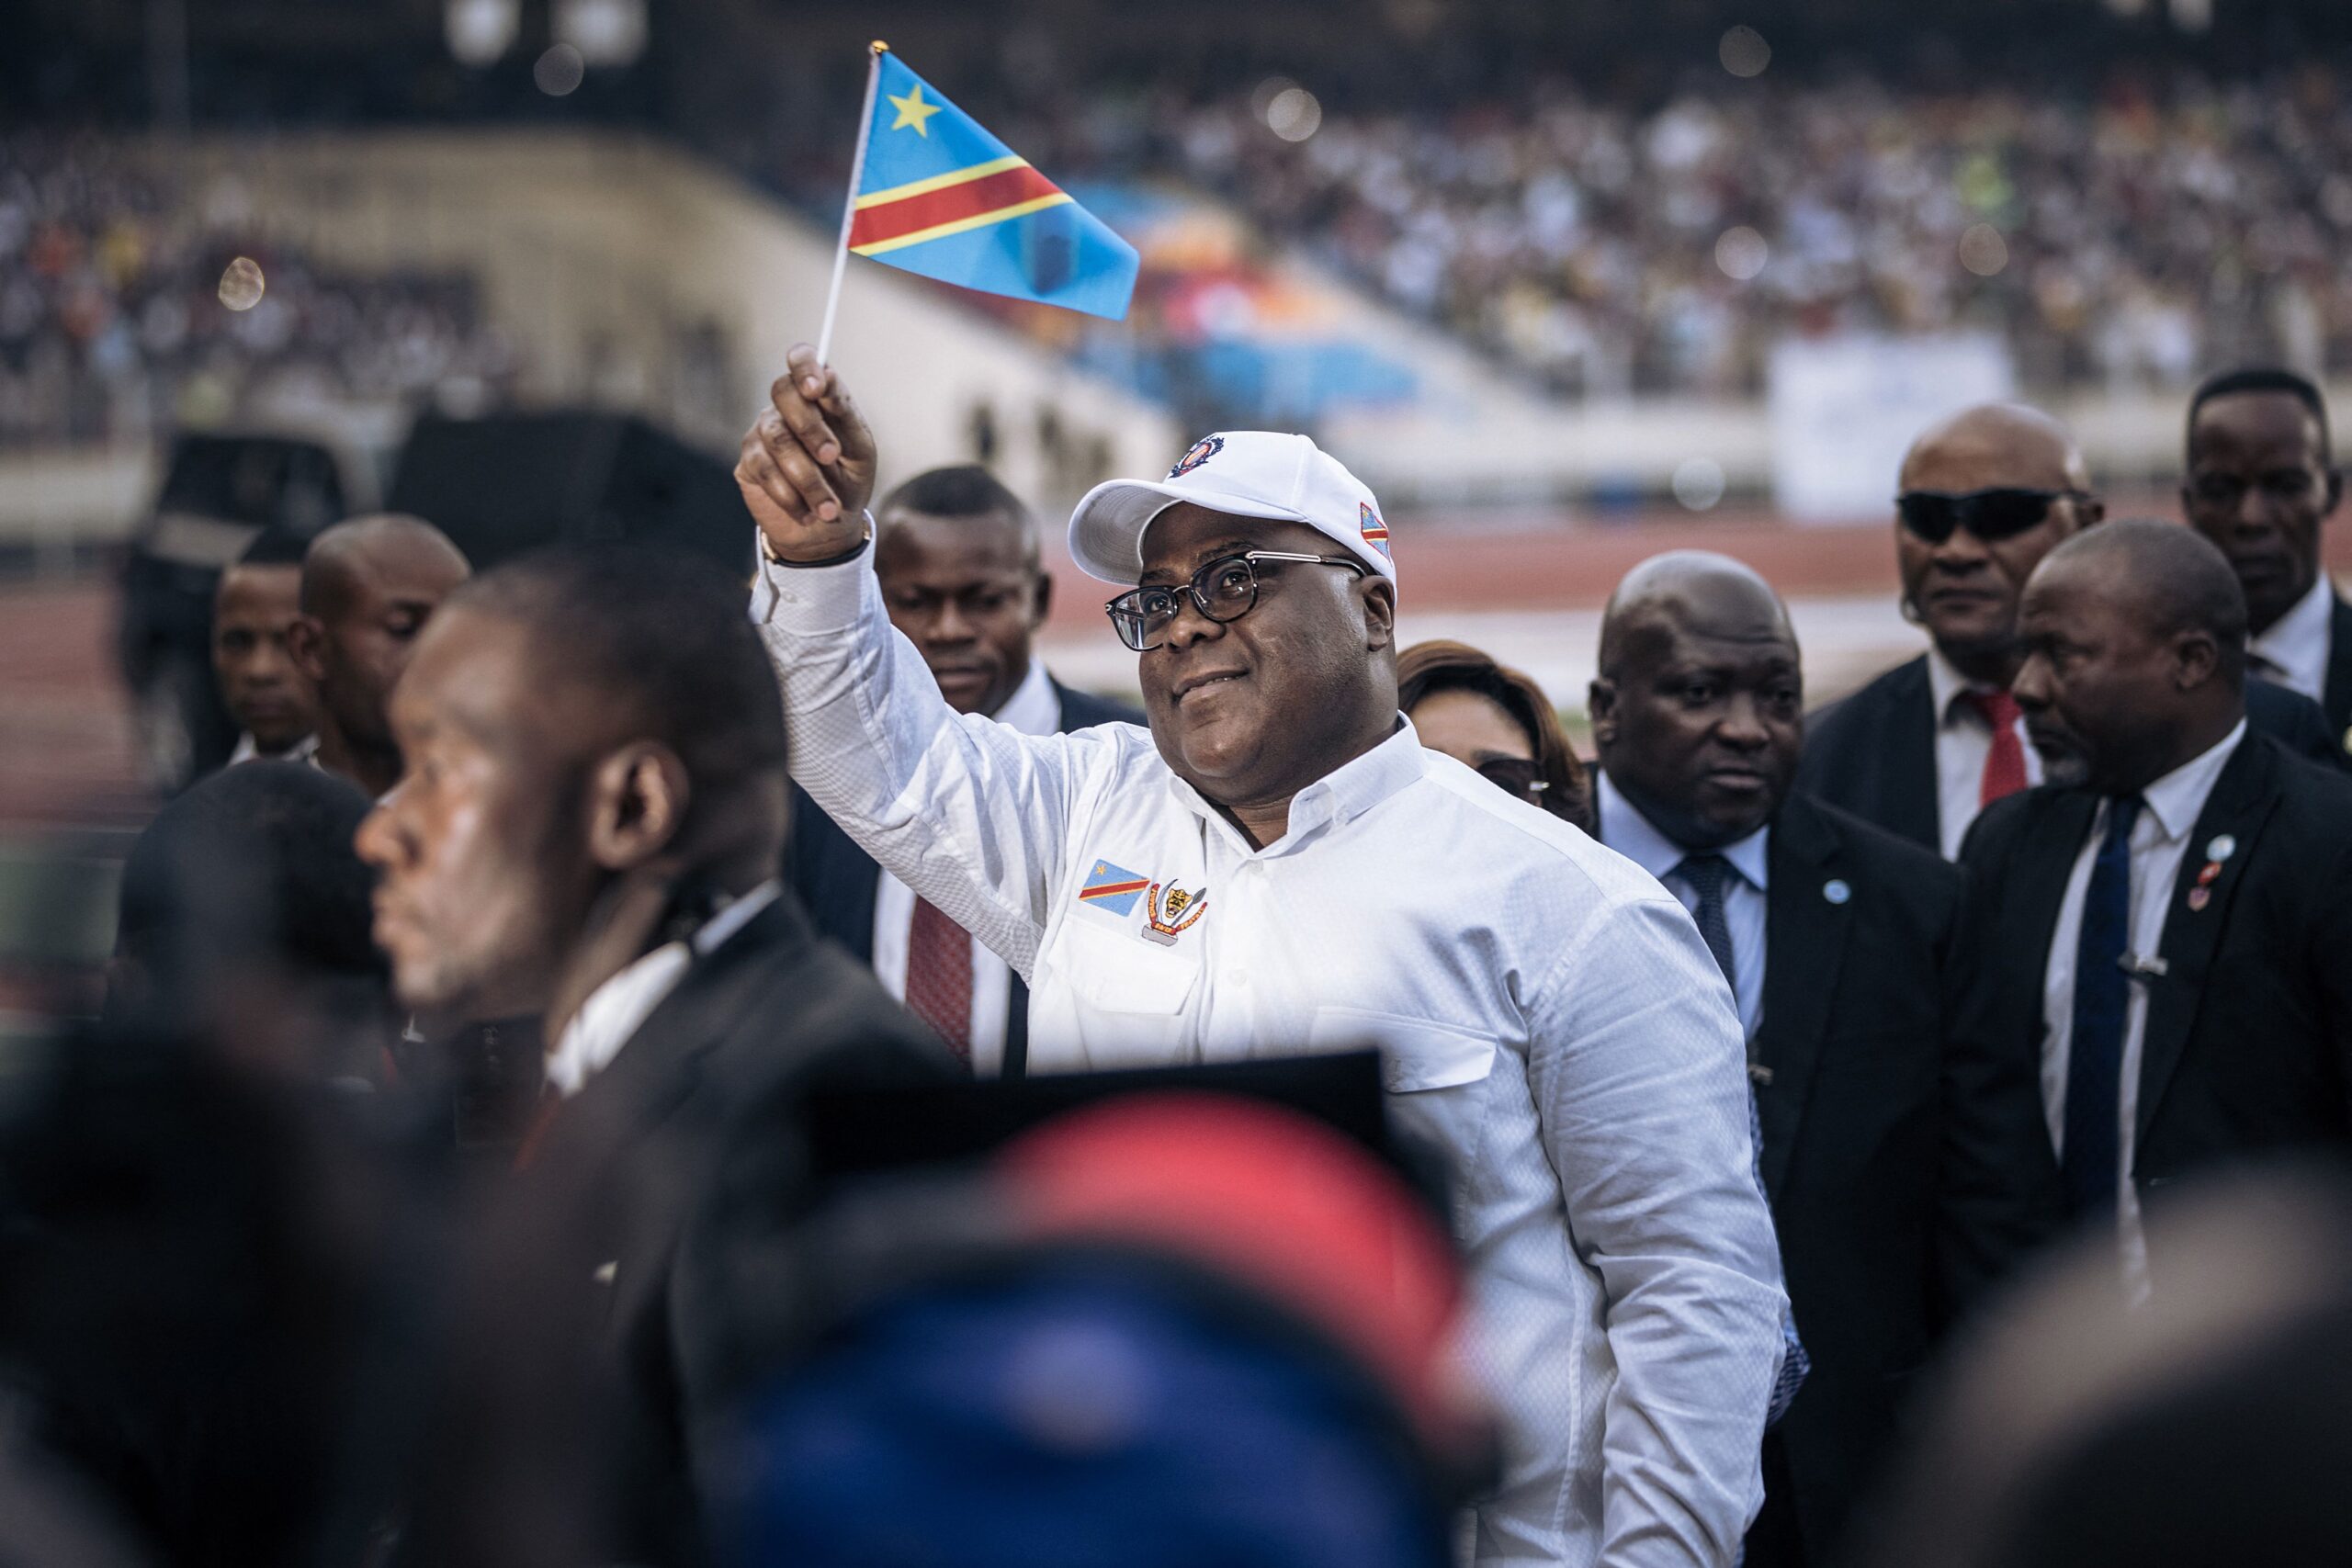 DR Congo Opposition Call For Massive Protests Ahead Of Tshisekedi’s Inauguration